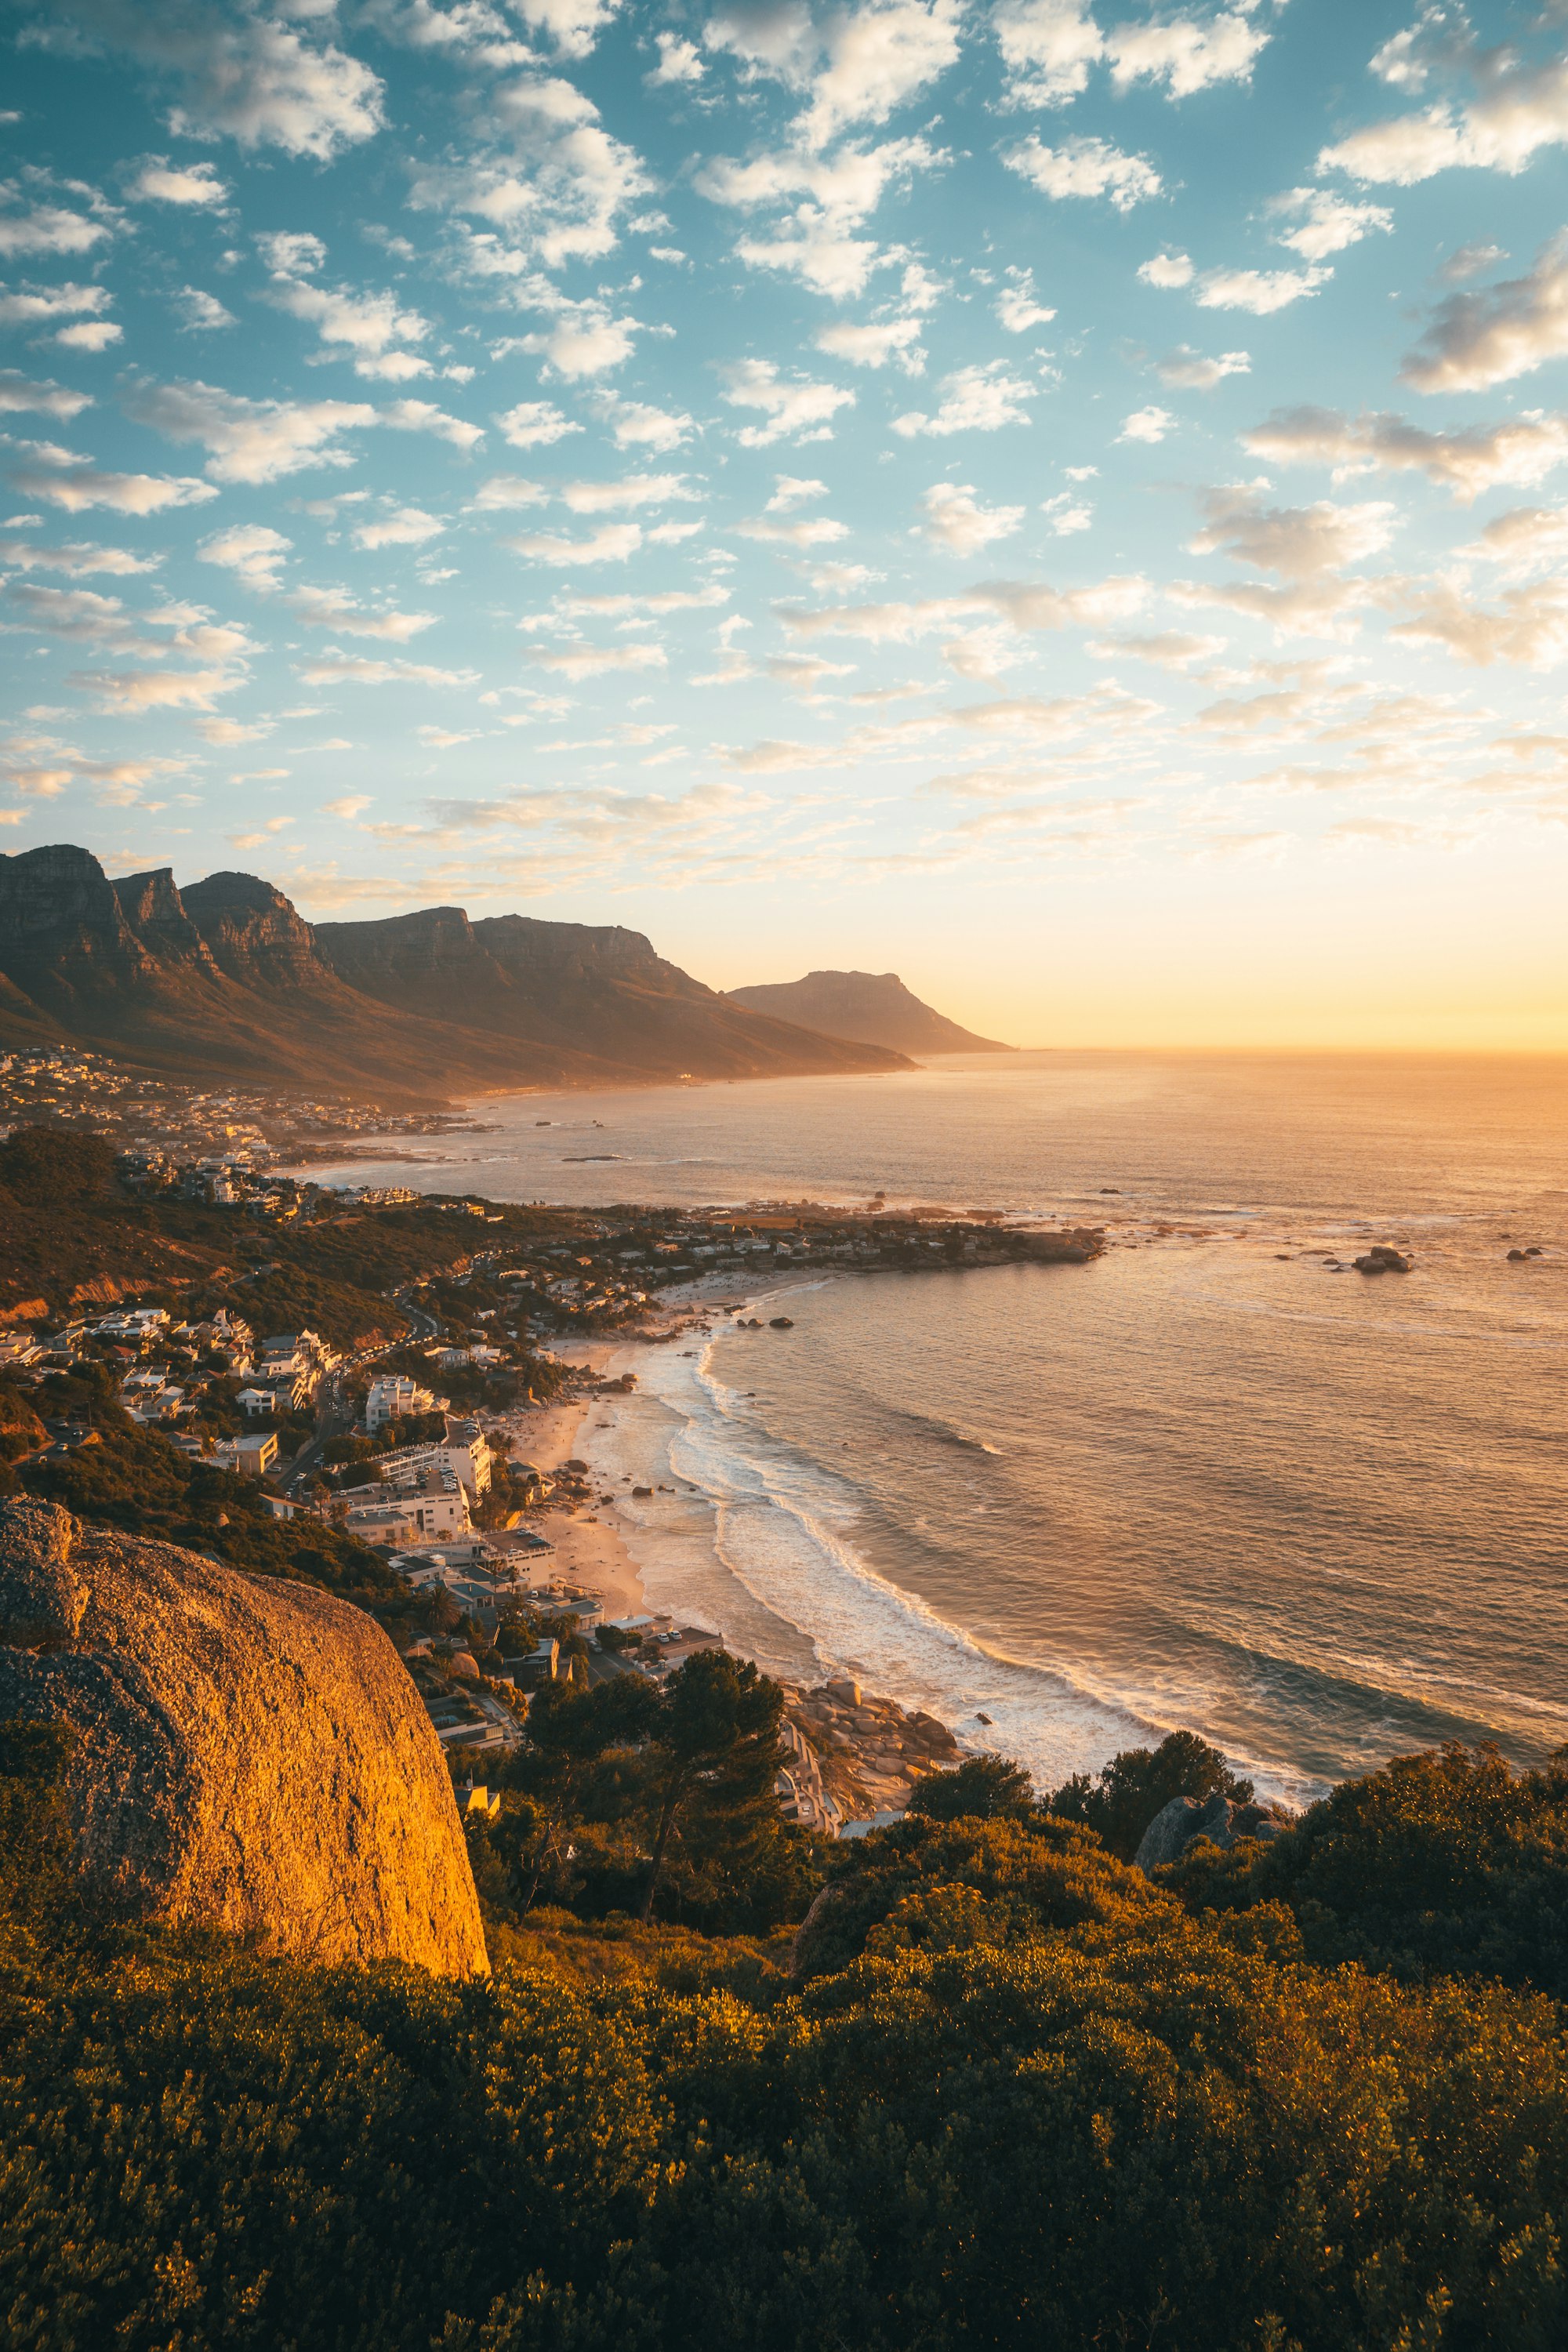 What is the best time to visit South Africa?